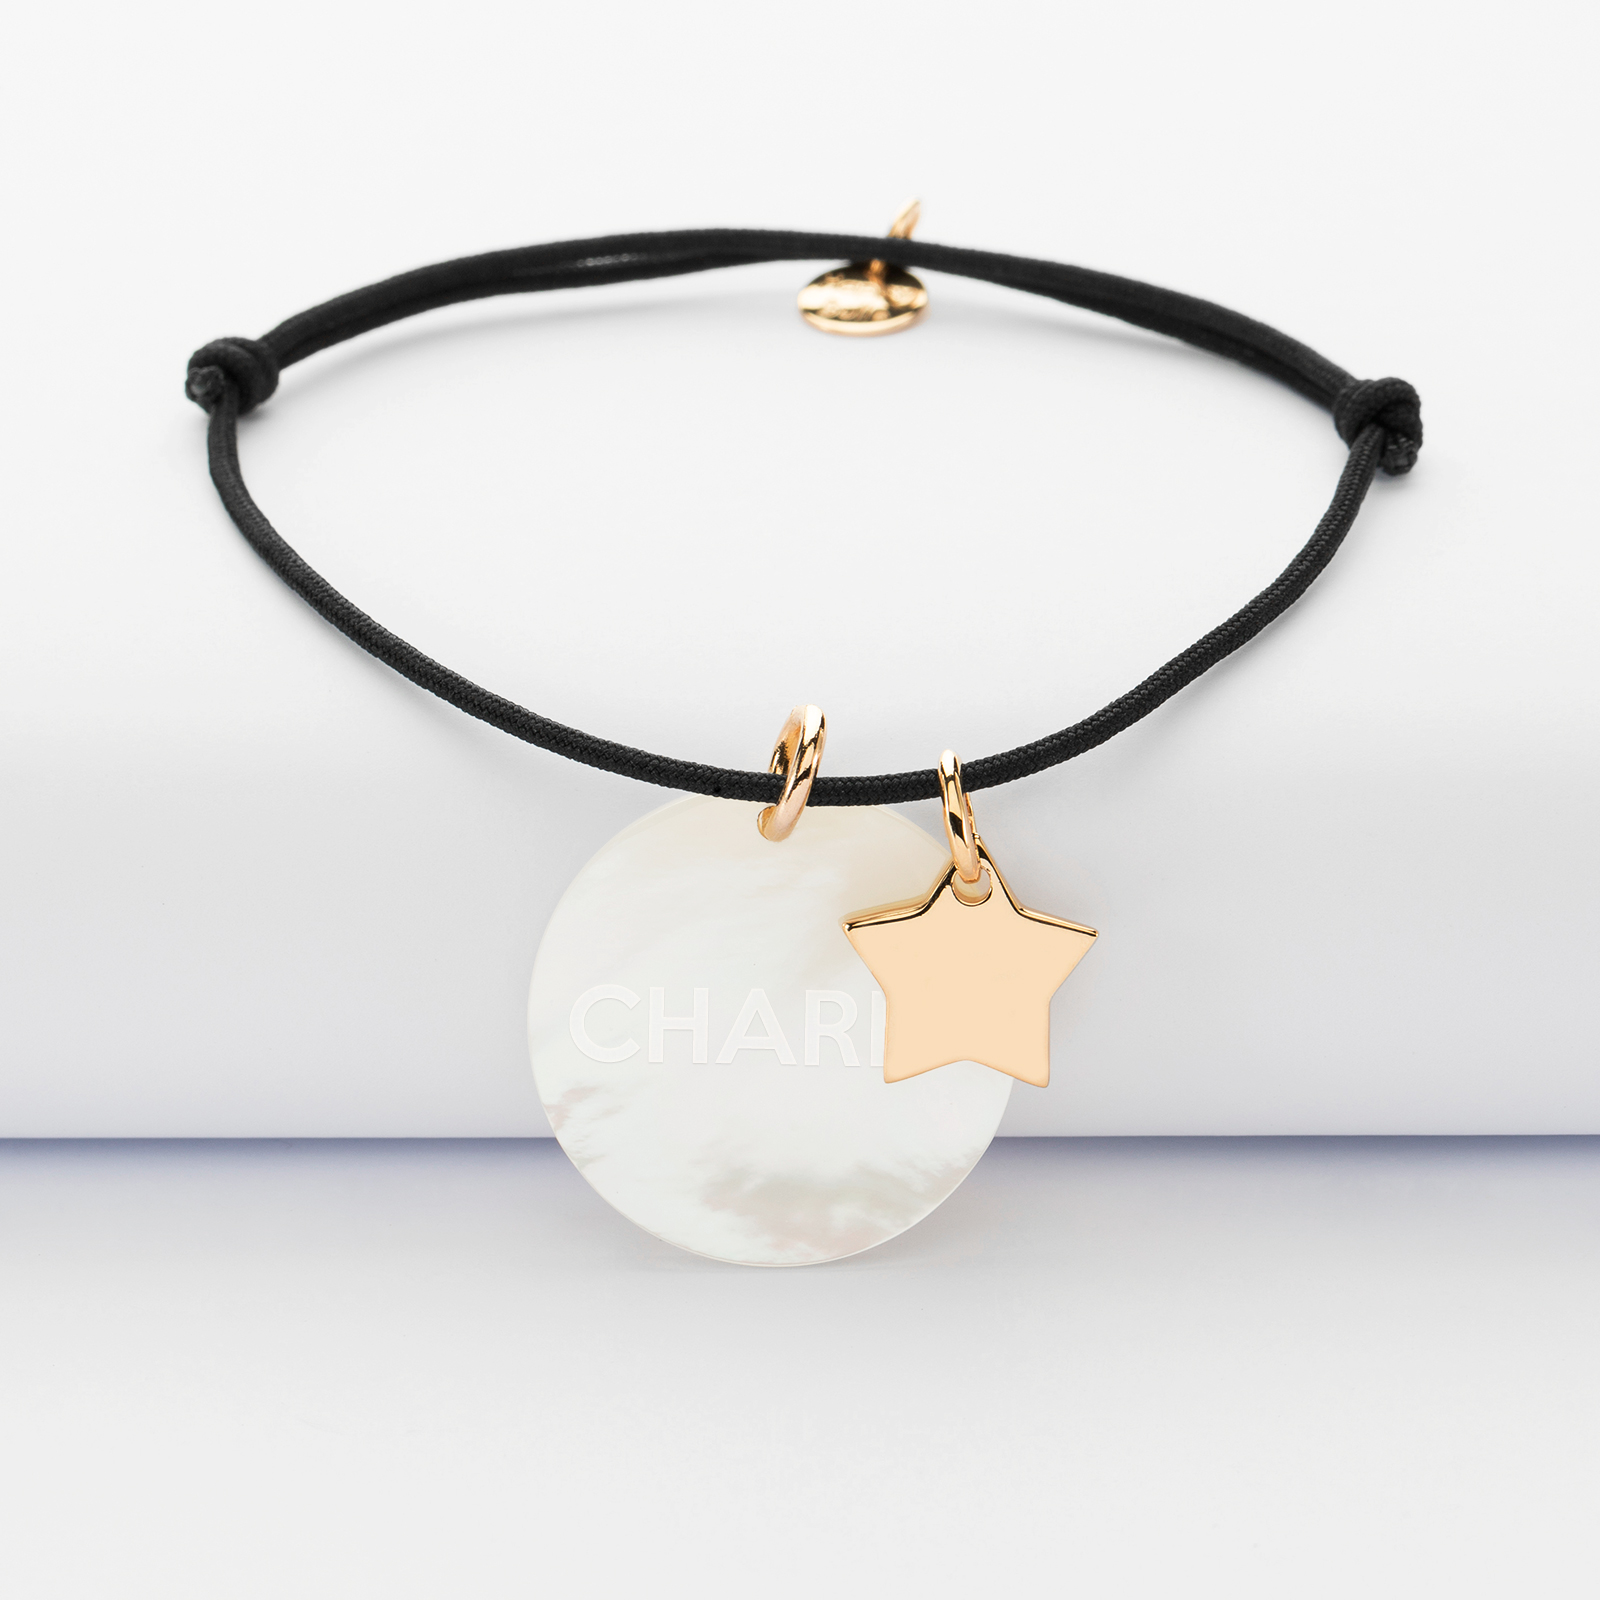 Personalised engraved mother-of-pearl medallion cord bracelet 25 mm and gold-plated star charm 12 mm - 1